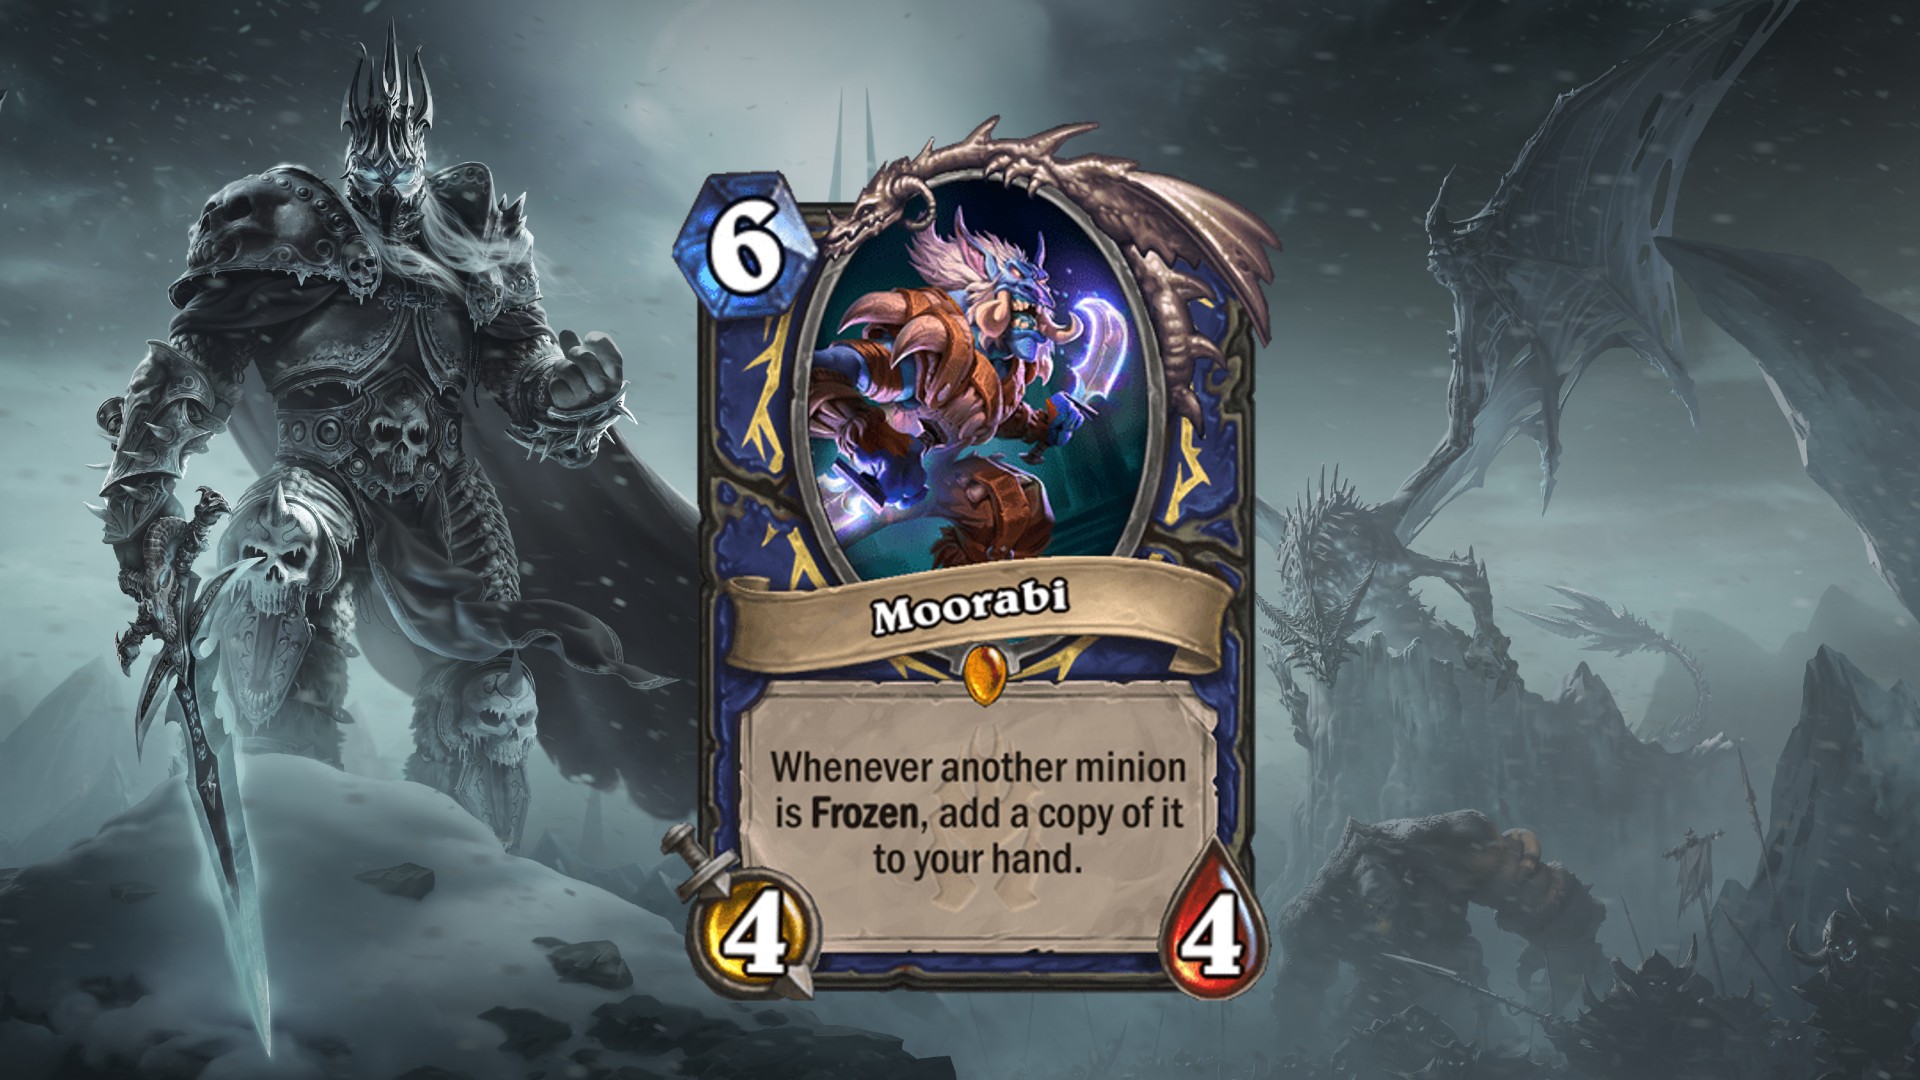 Card images and art from Hearthstone's  Knights of the Frozen Throne expansion.